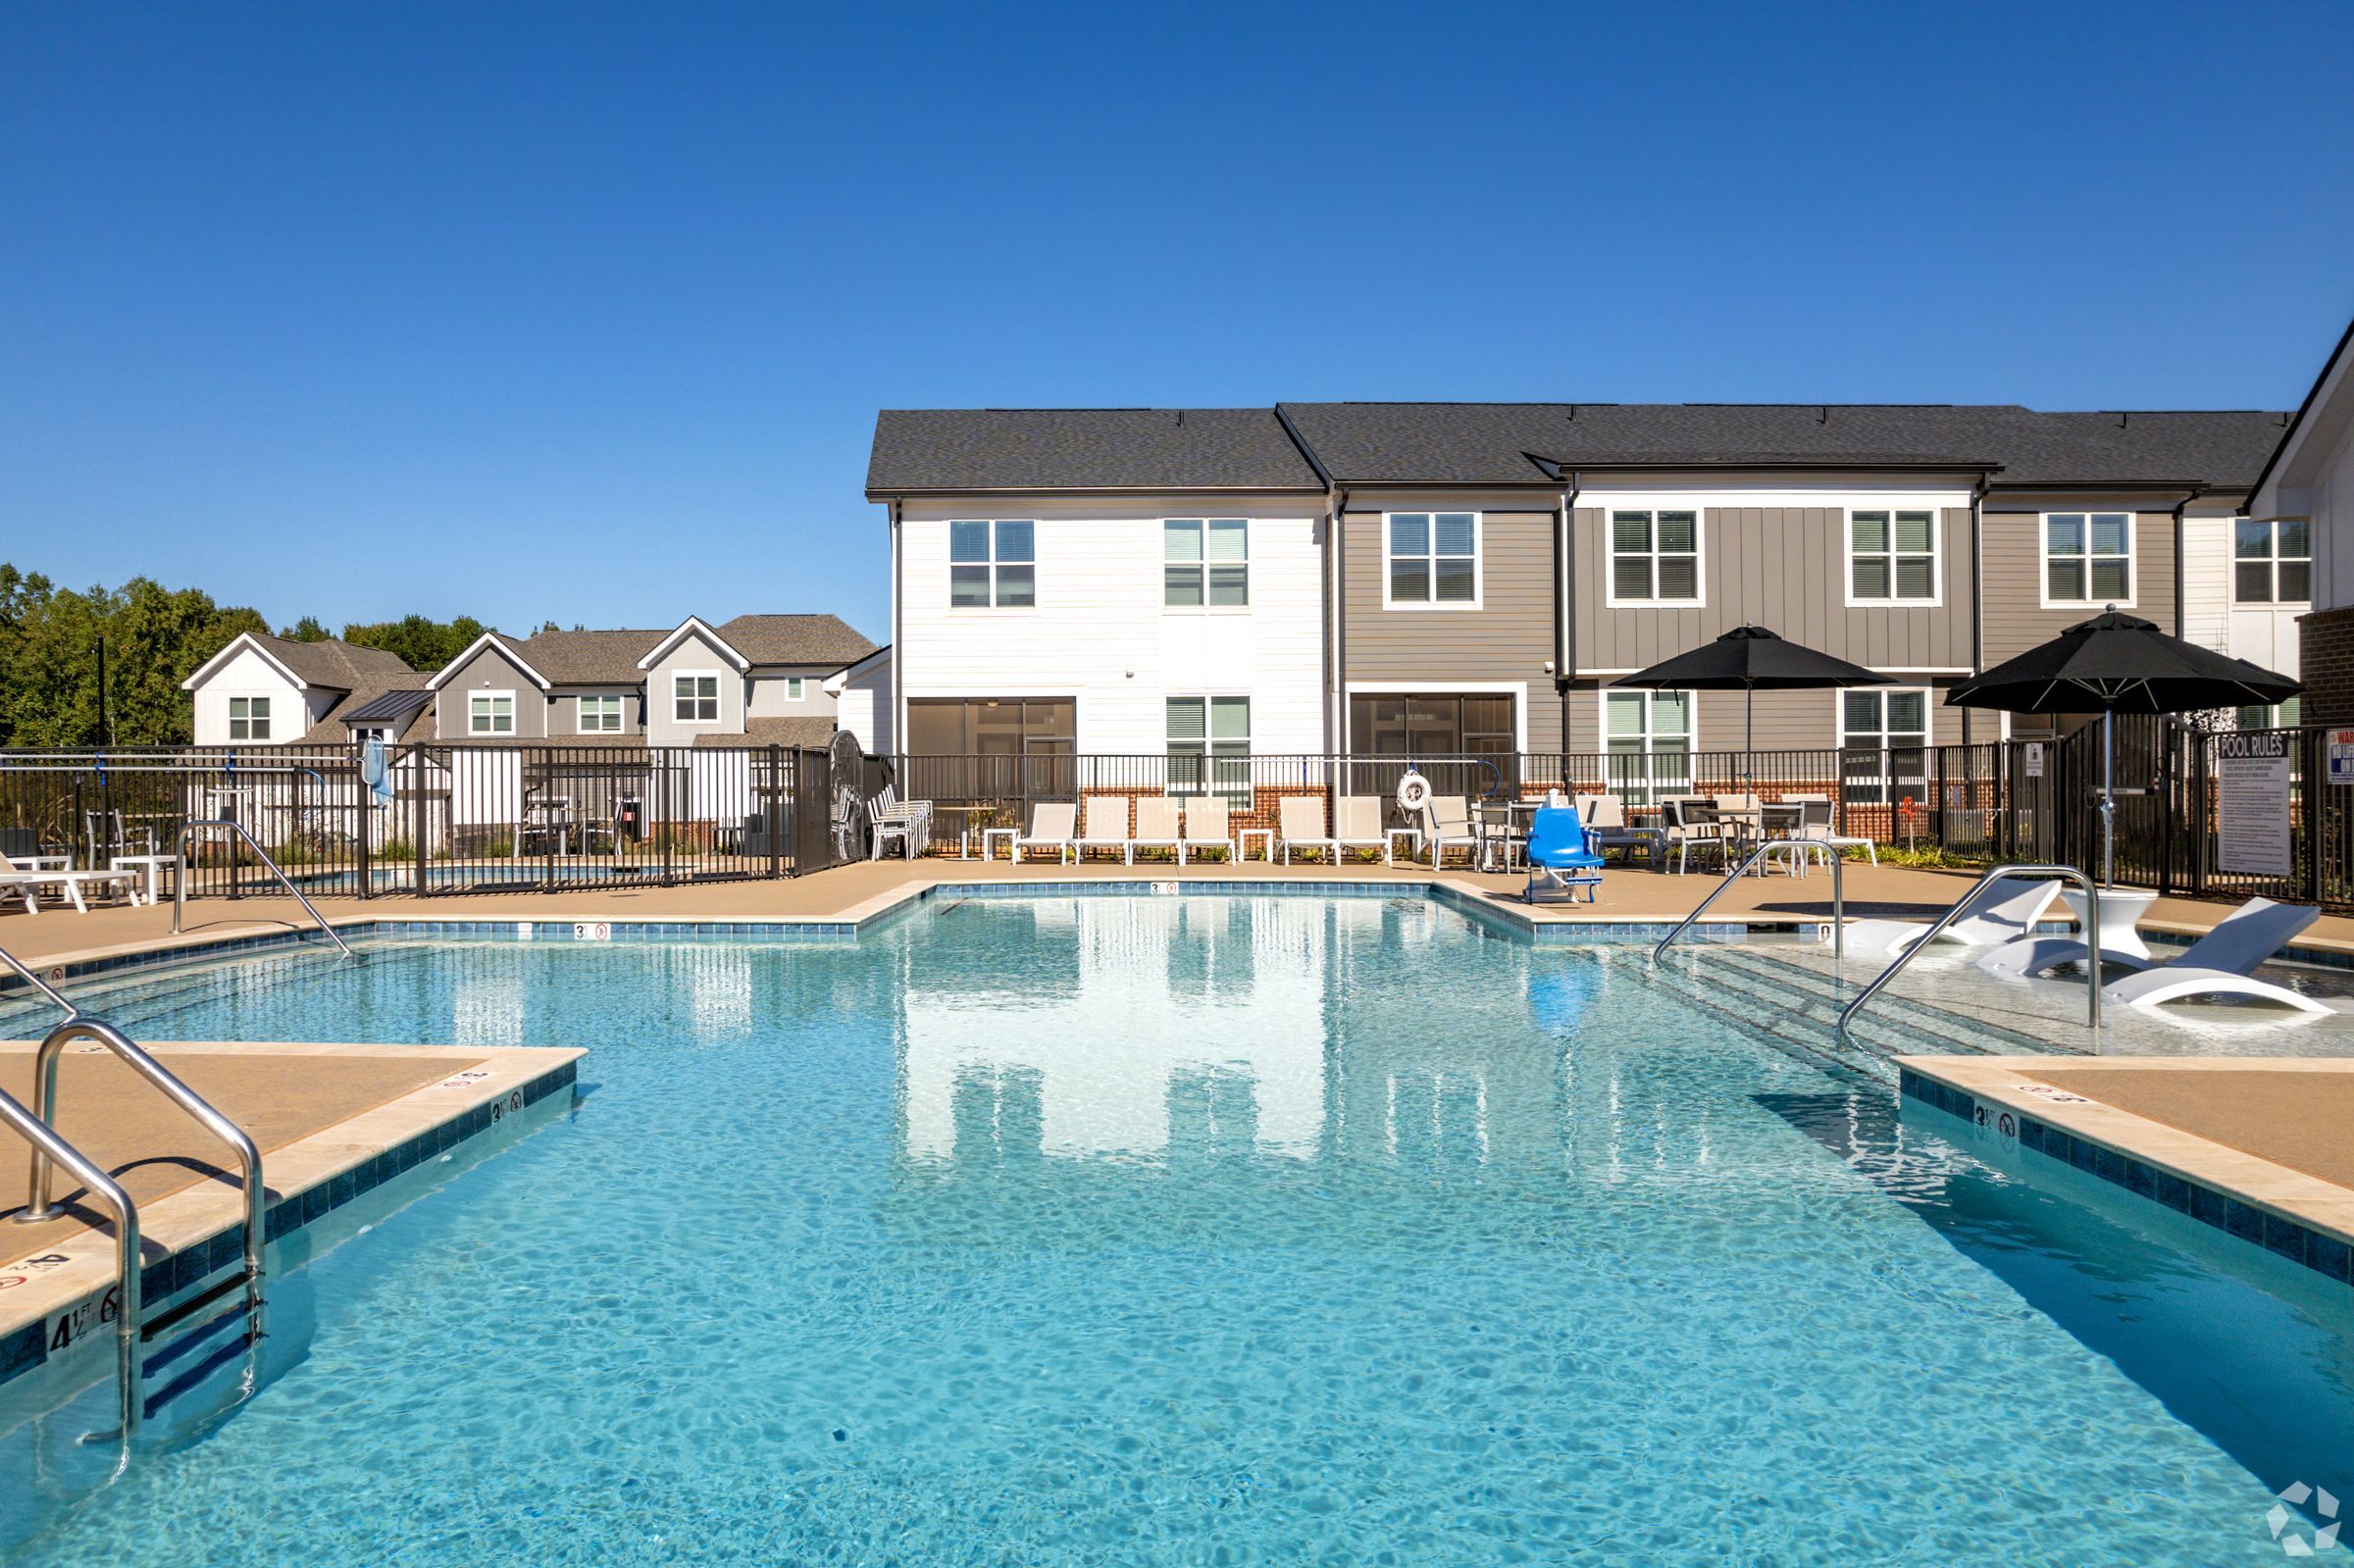 The Townhomes at Bridlestone outdoor pool with surrounding townhomes